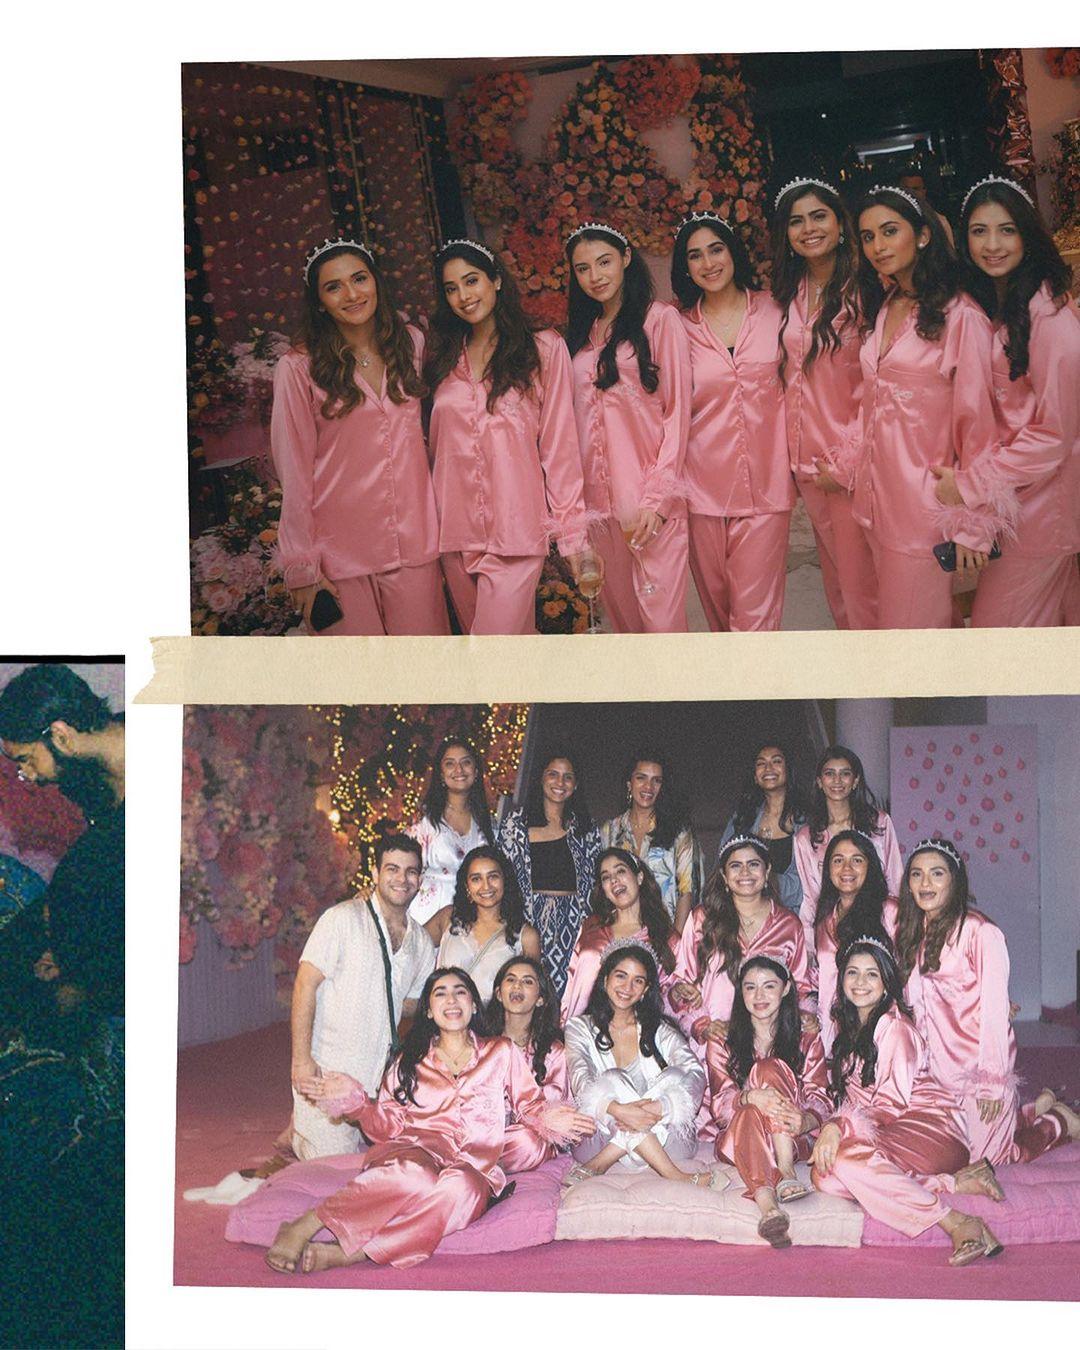 In the pictures, all the beautiful ladies were seen dressed in stunning pink dresses with shiny tiaras, while Radhika wore a beautiful white outfit